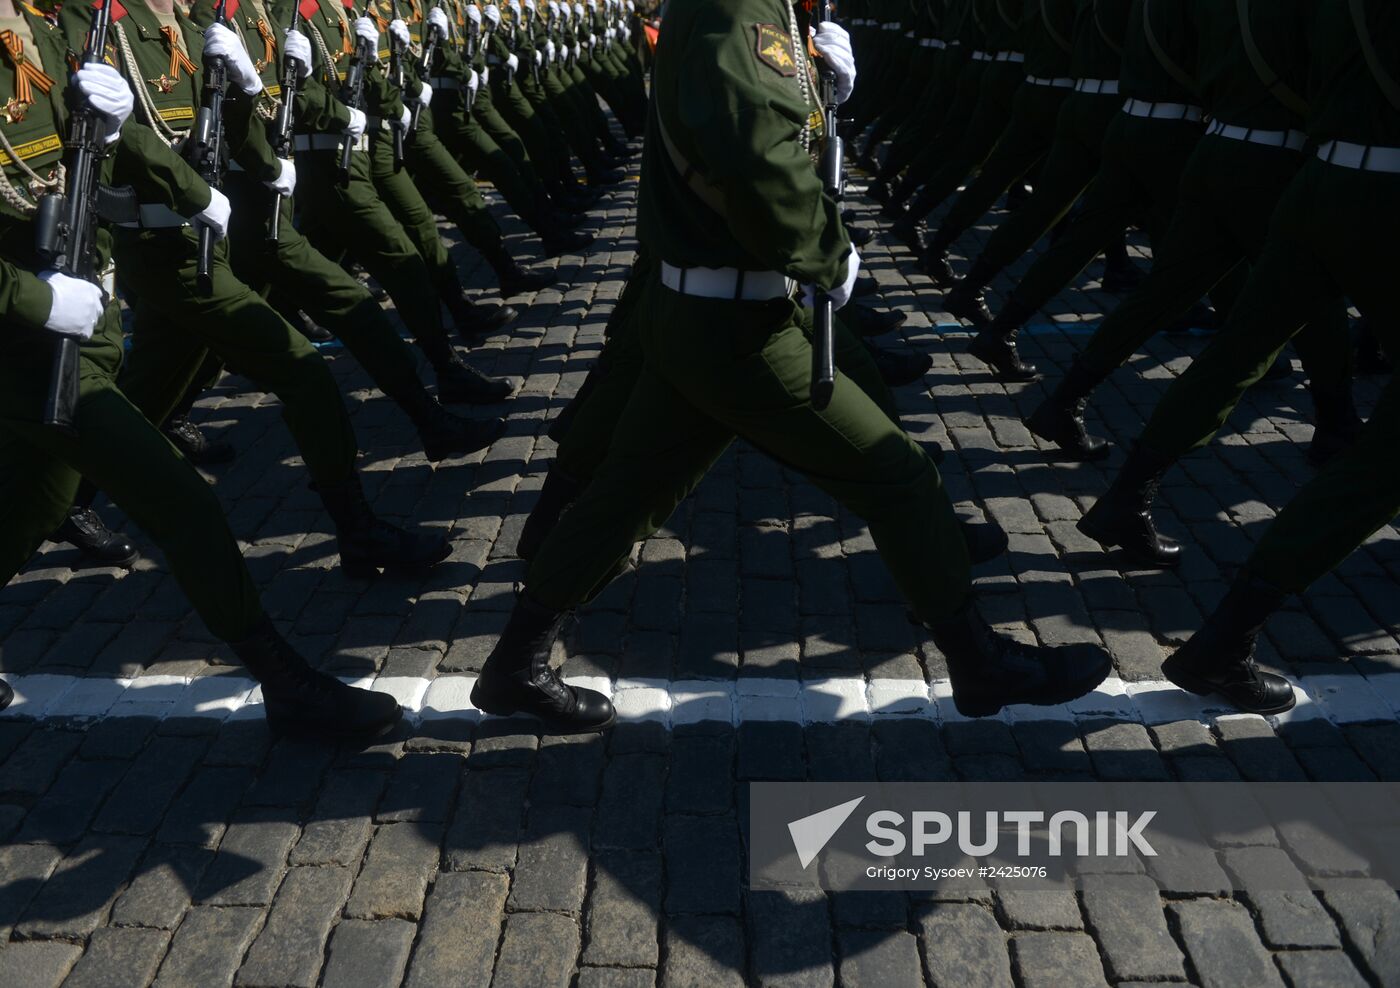 Parade on 69th anniversary of victory in Great Patriotic War